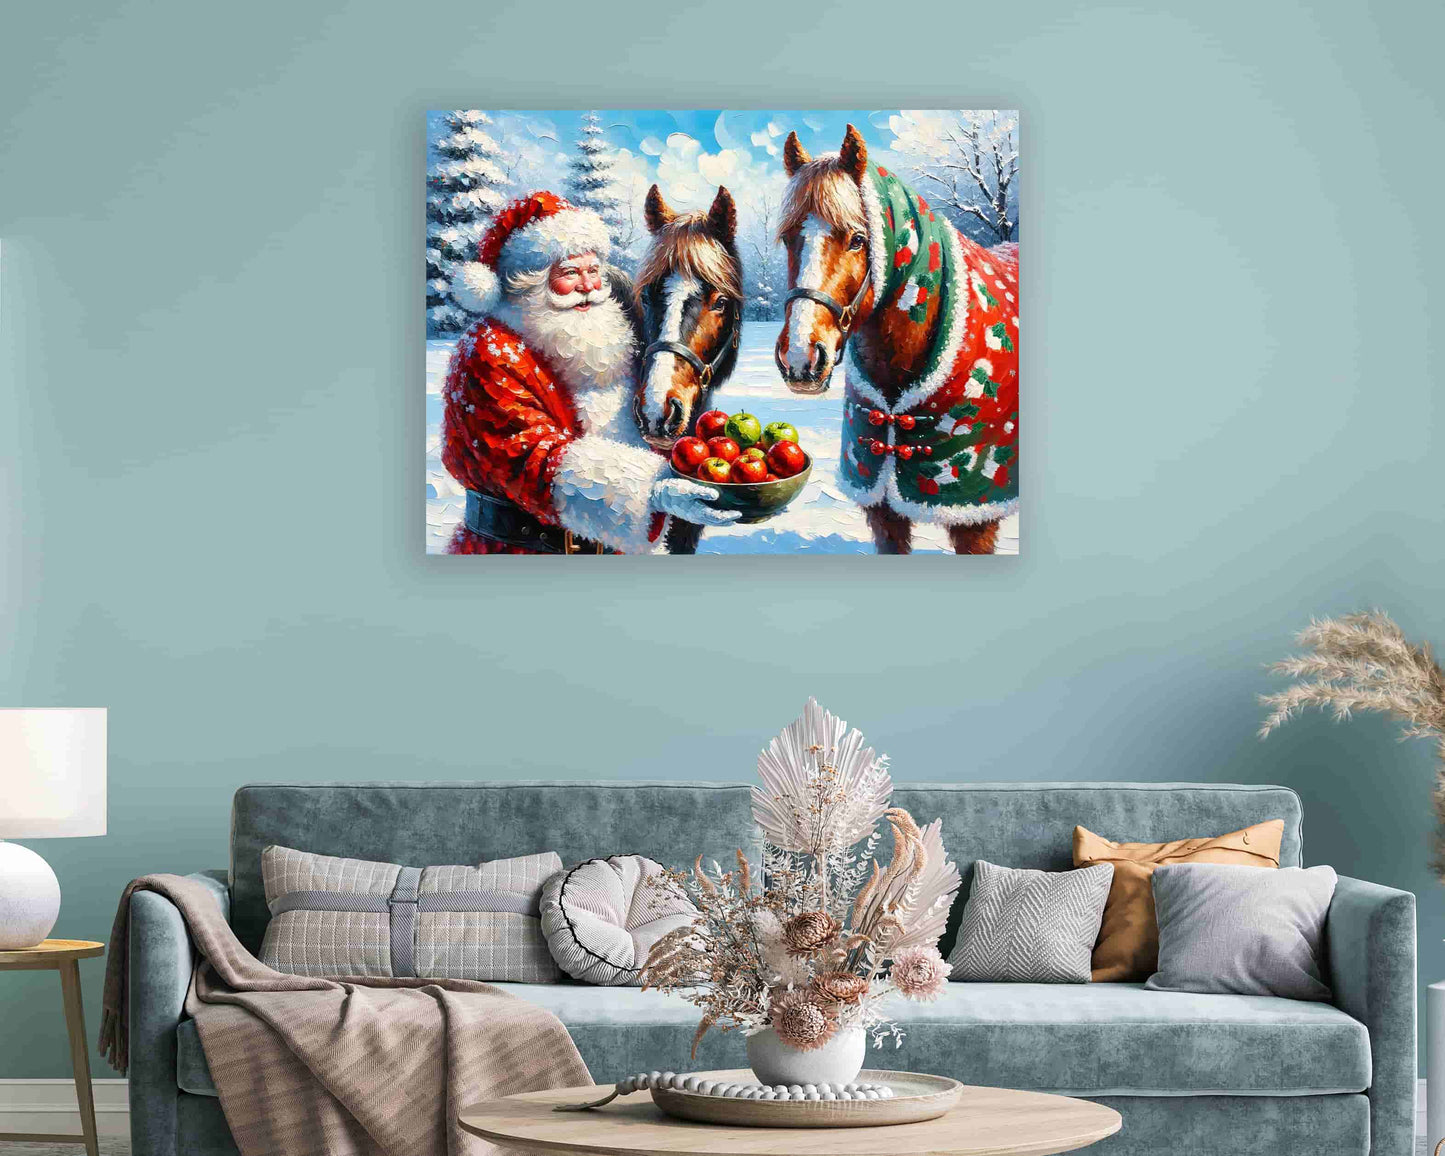 "Winter's Gentle Feast - Santa Claus with Festive Horses" Wrapped Canvas Wall Art Prints